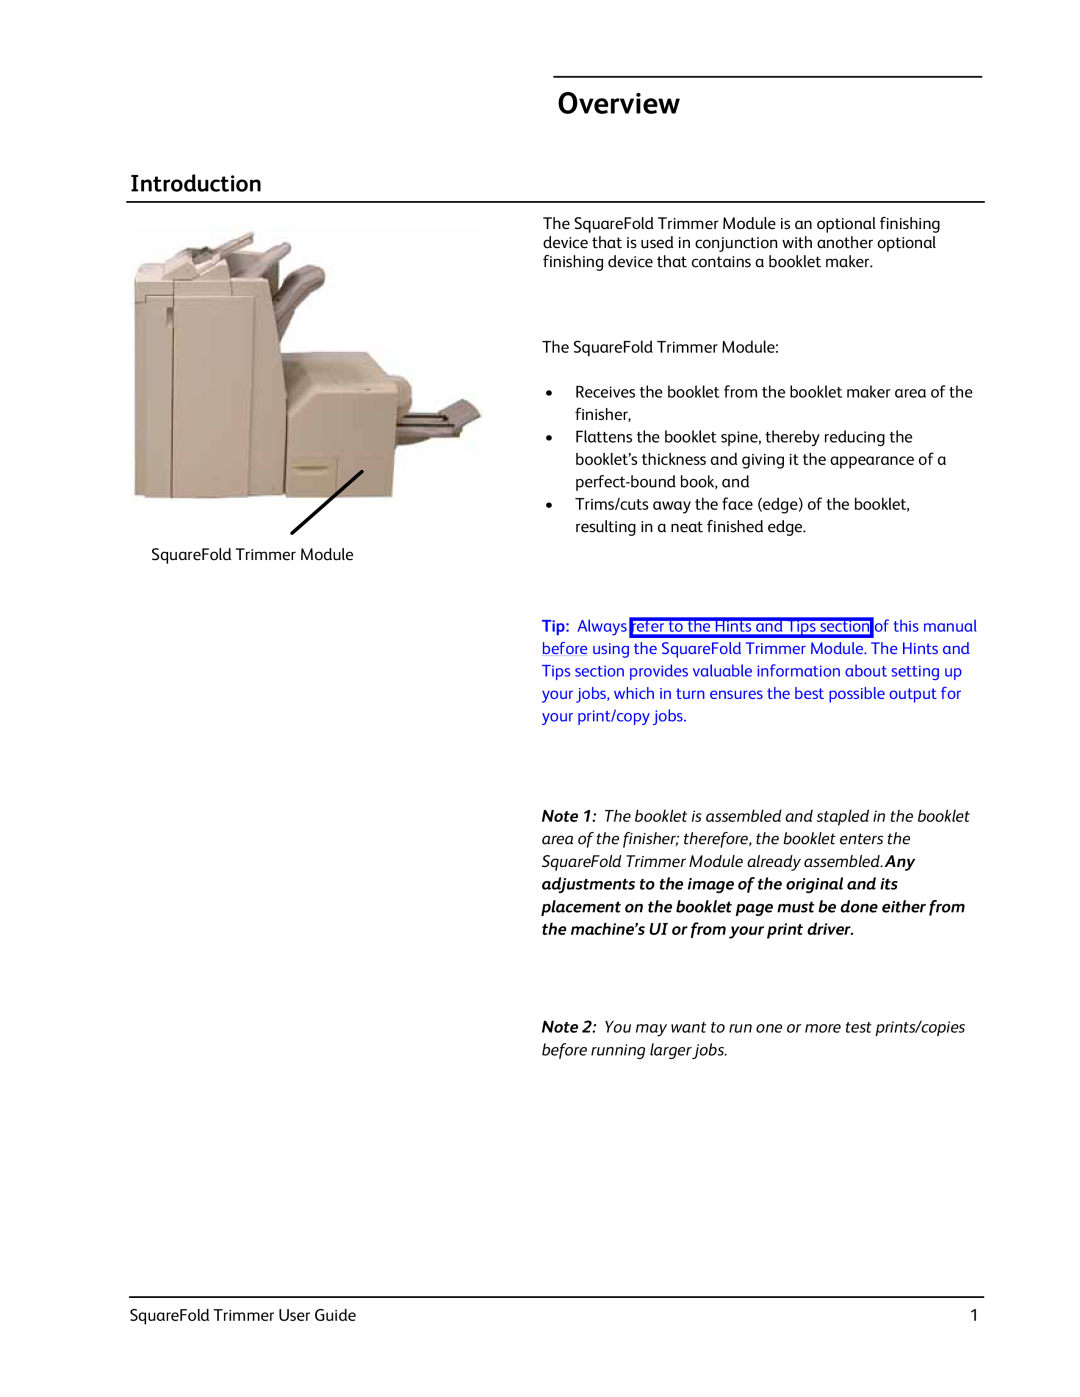 Xerox SquareFold manual Overview, Introduction 